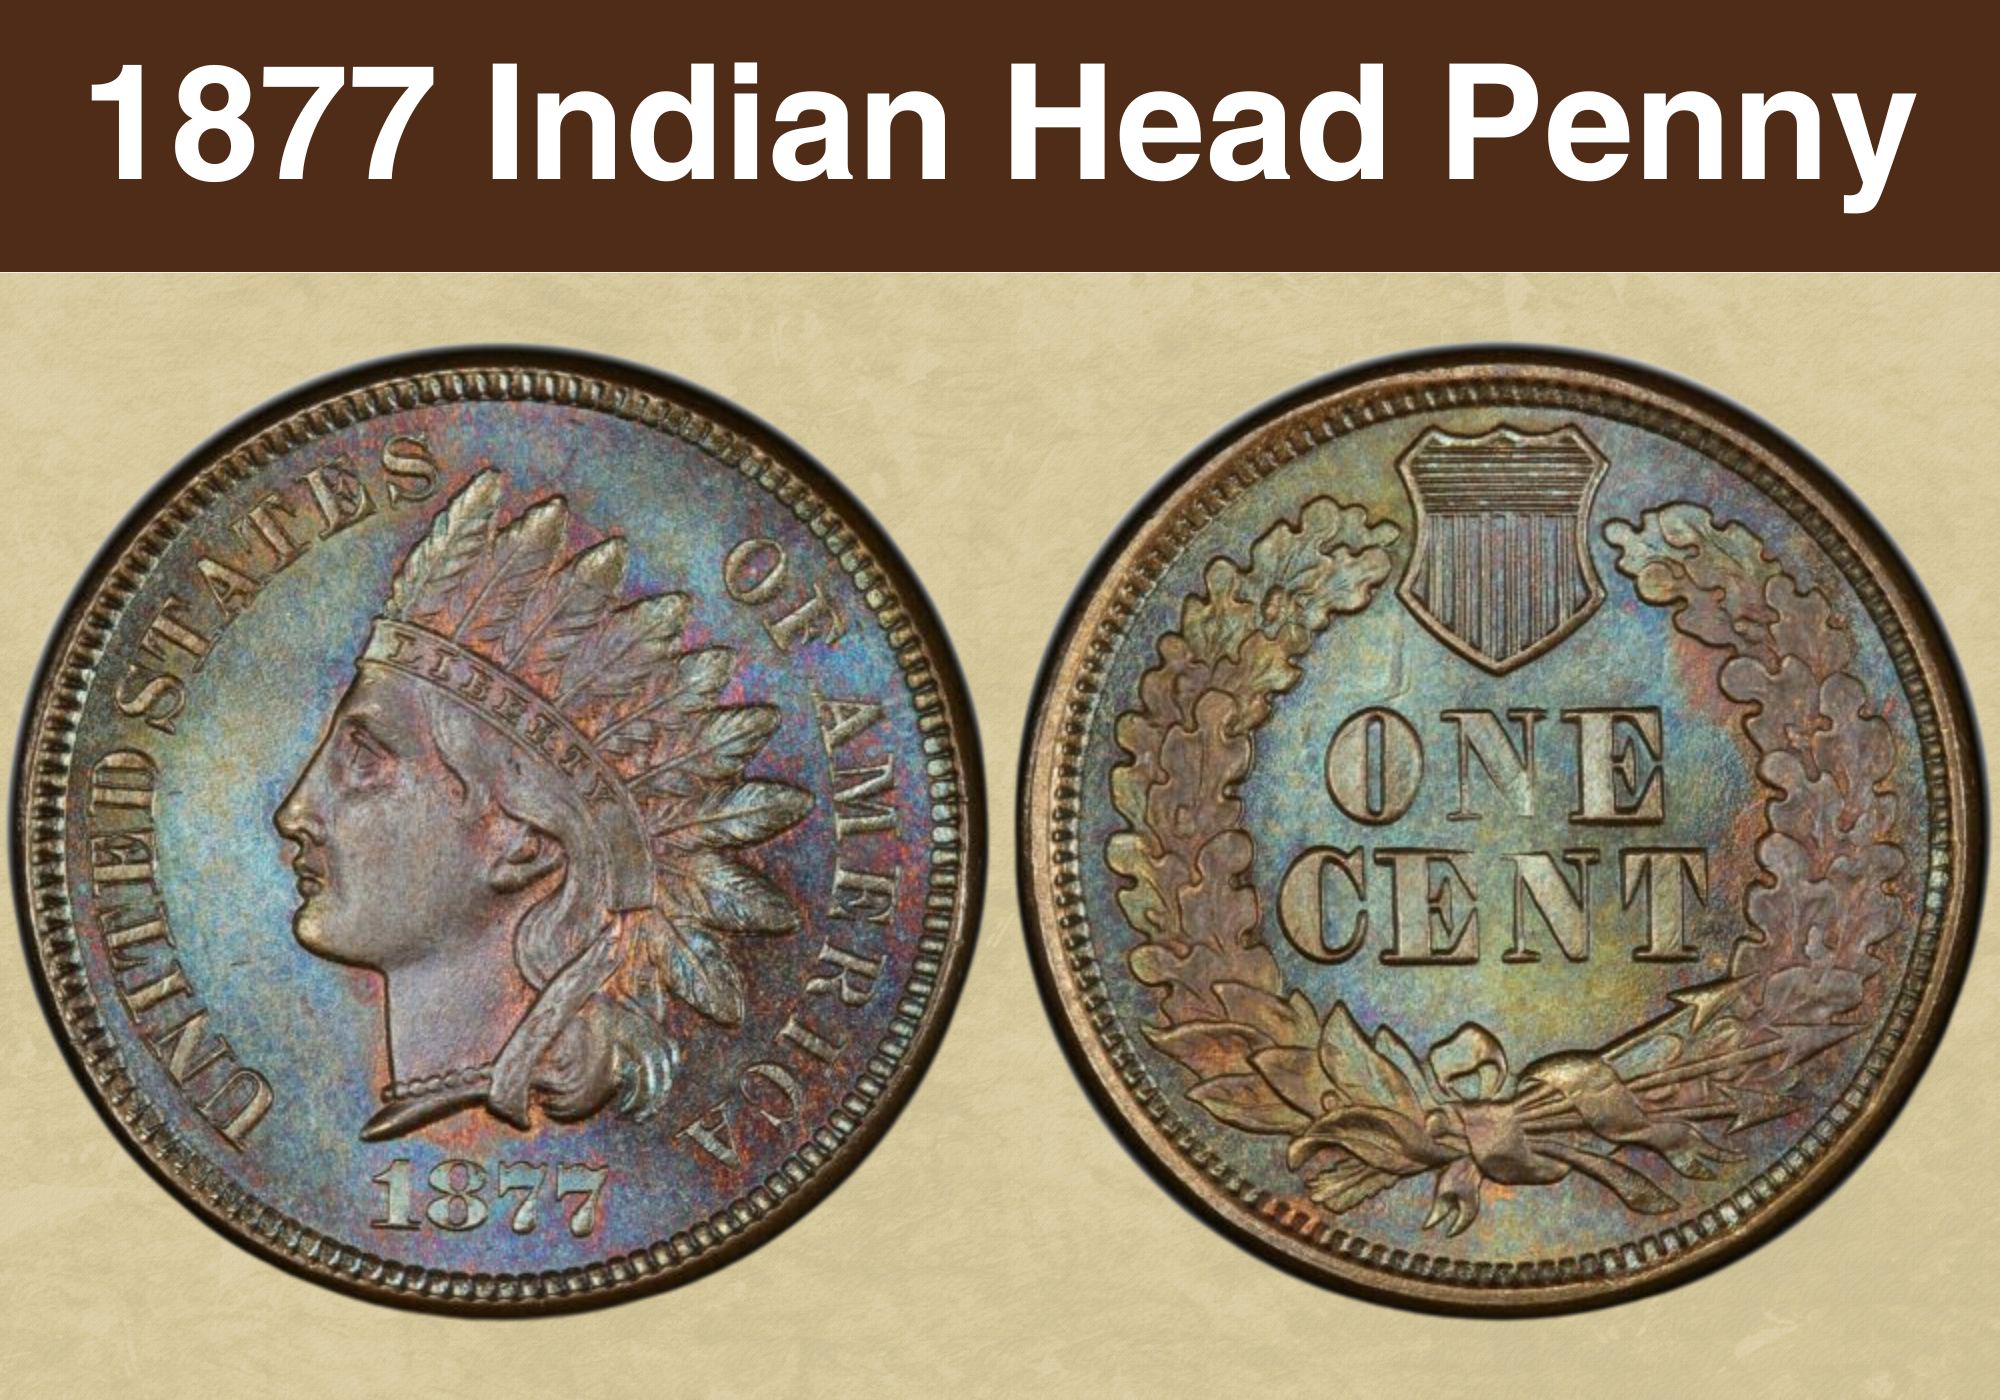 1877 Indian Head Penny Value